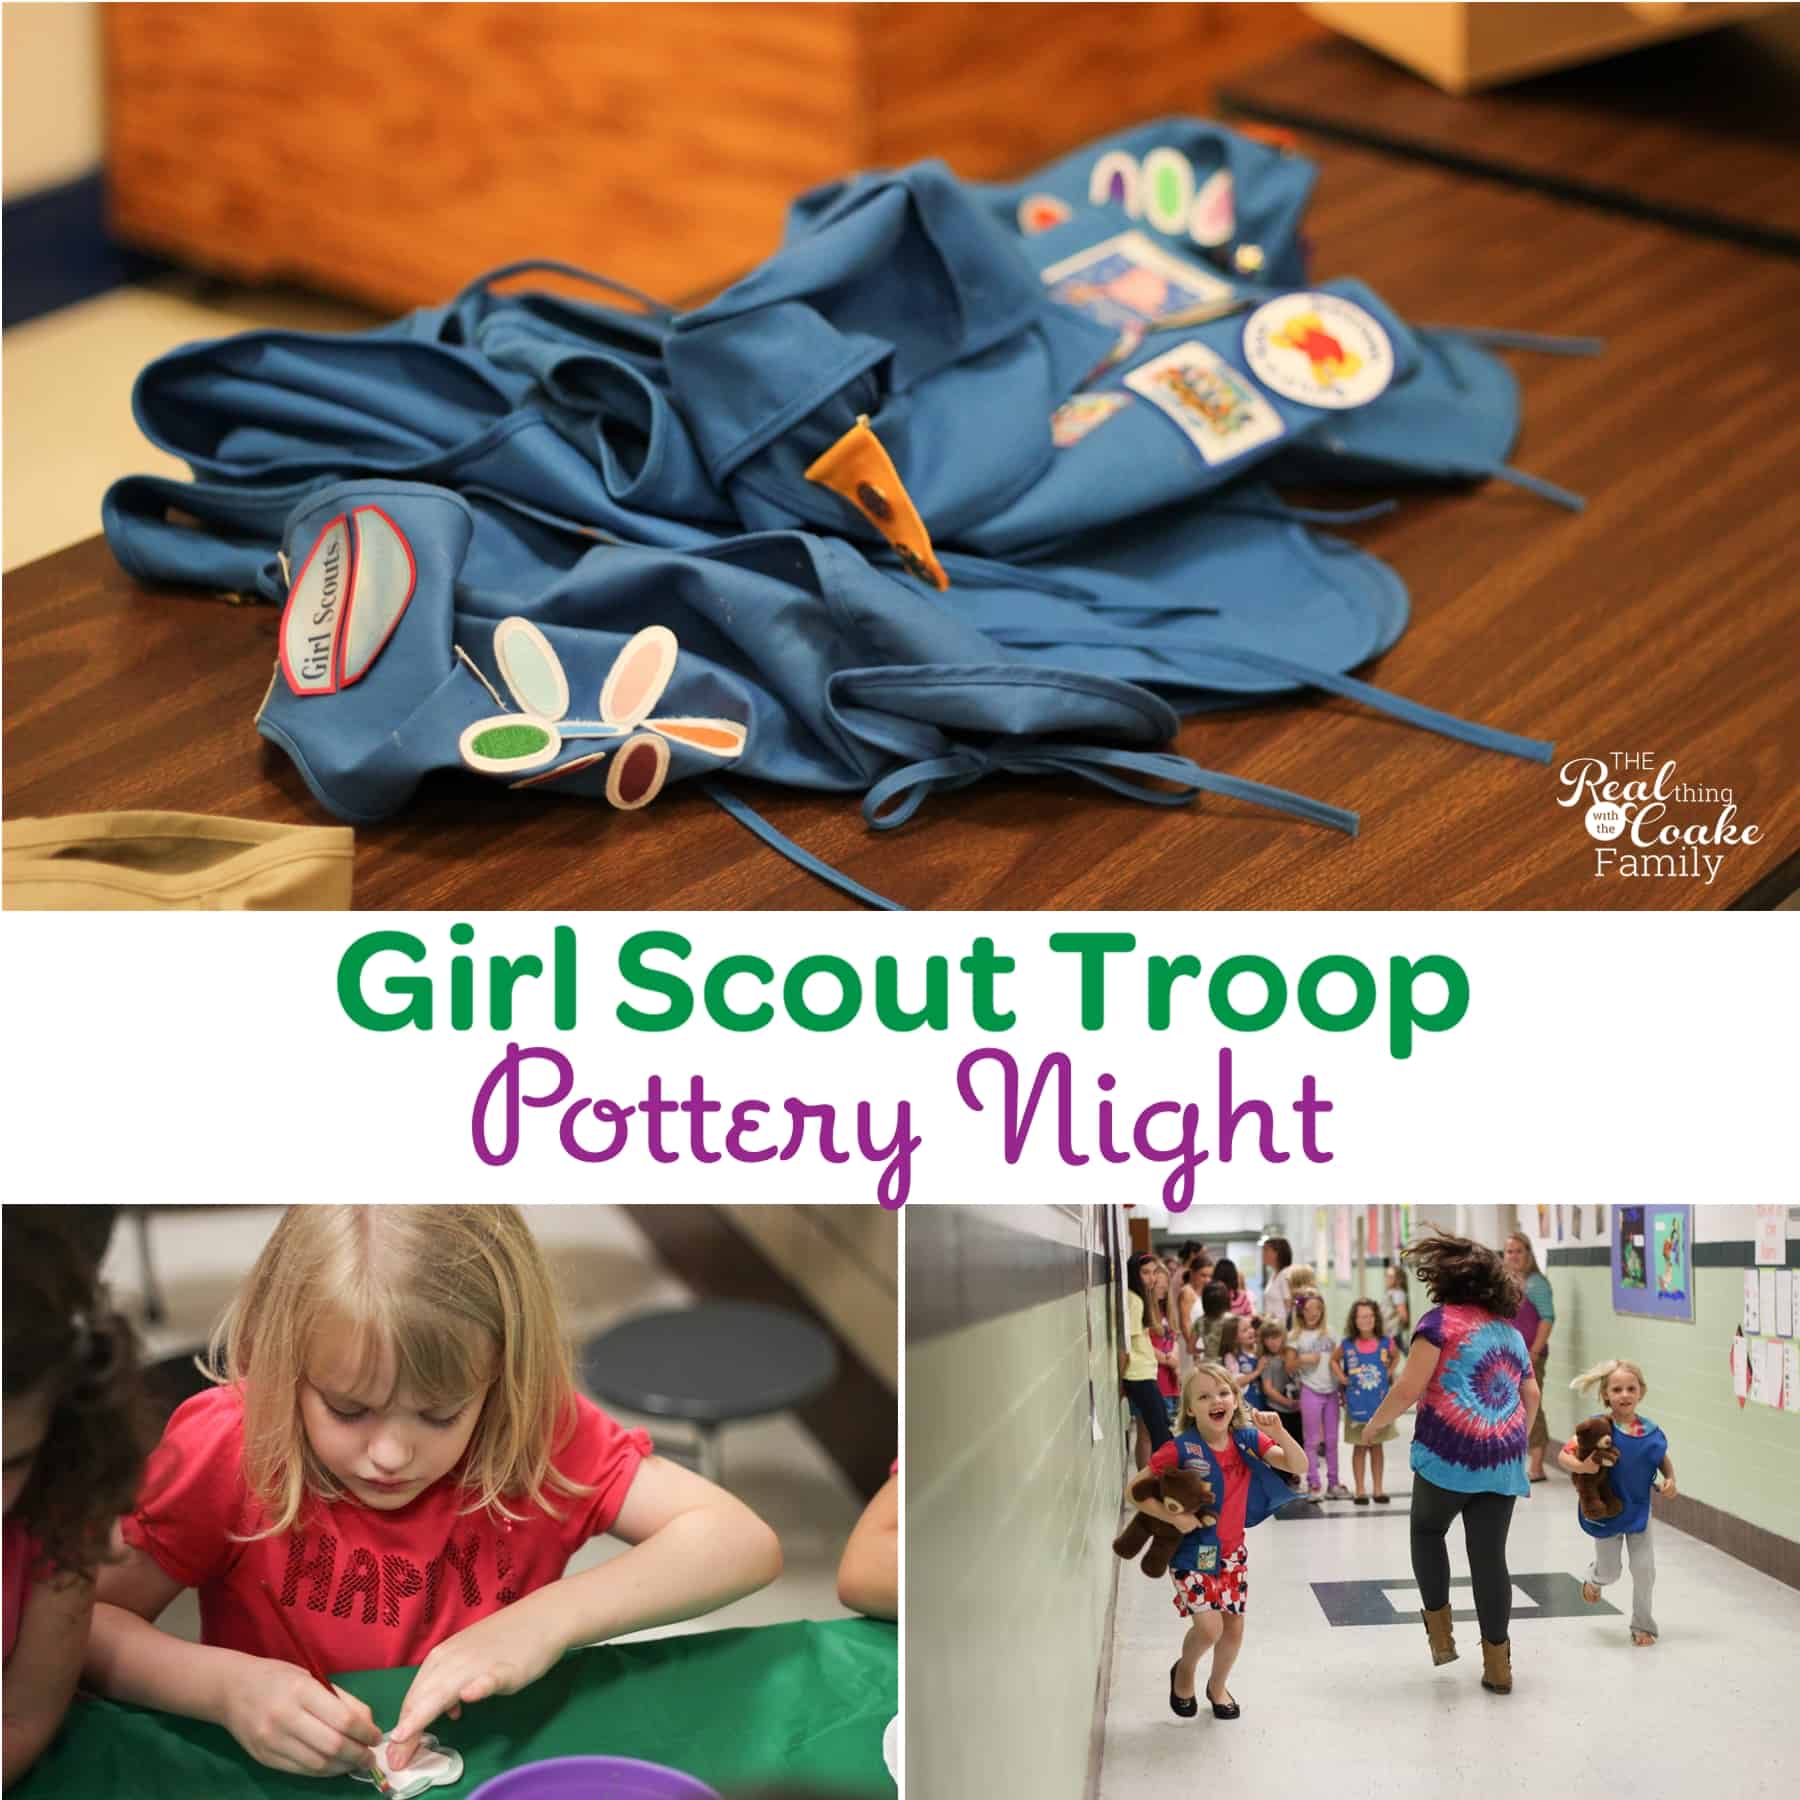 Fun event for Girl Scouts or other group. Host a pottery night complete with snacks, games and painting. #GirlScouts #Activities #RealCoake